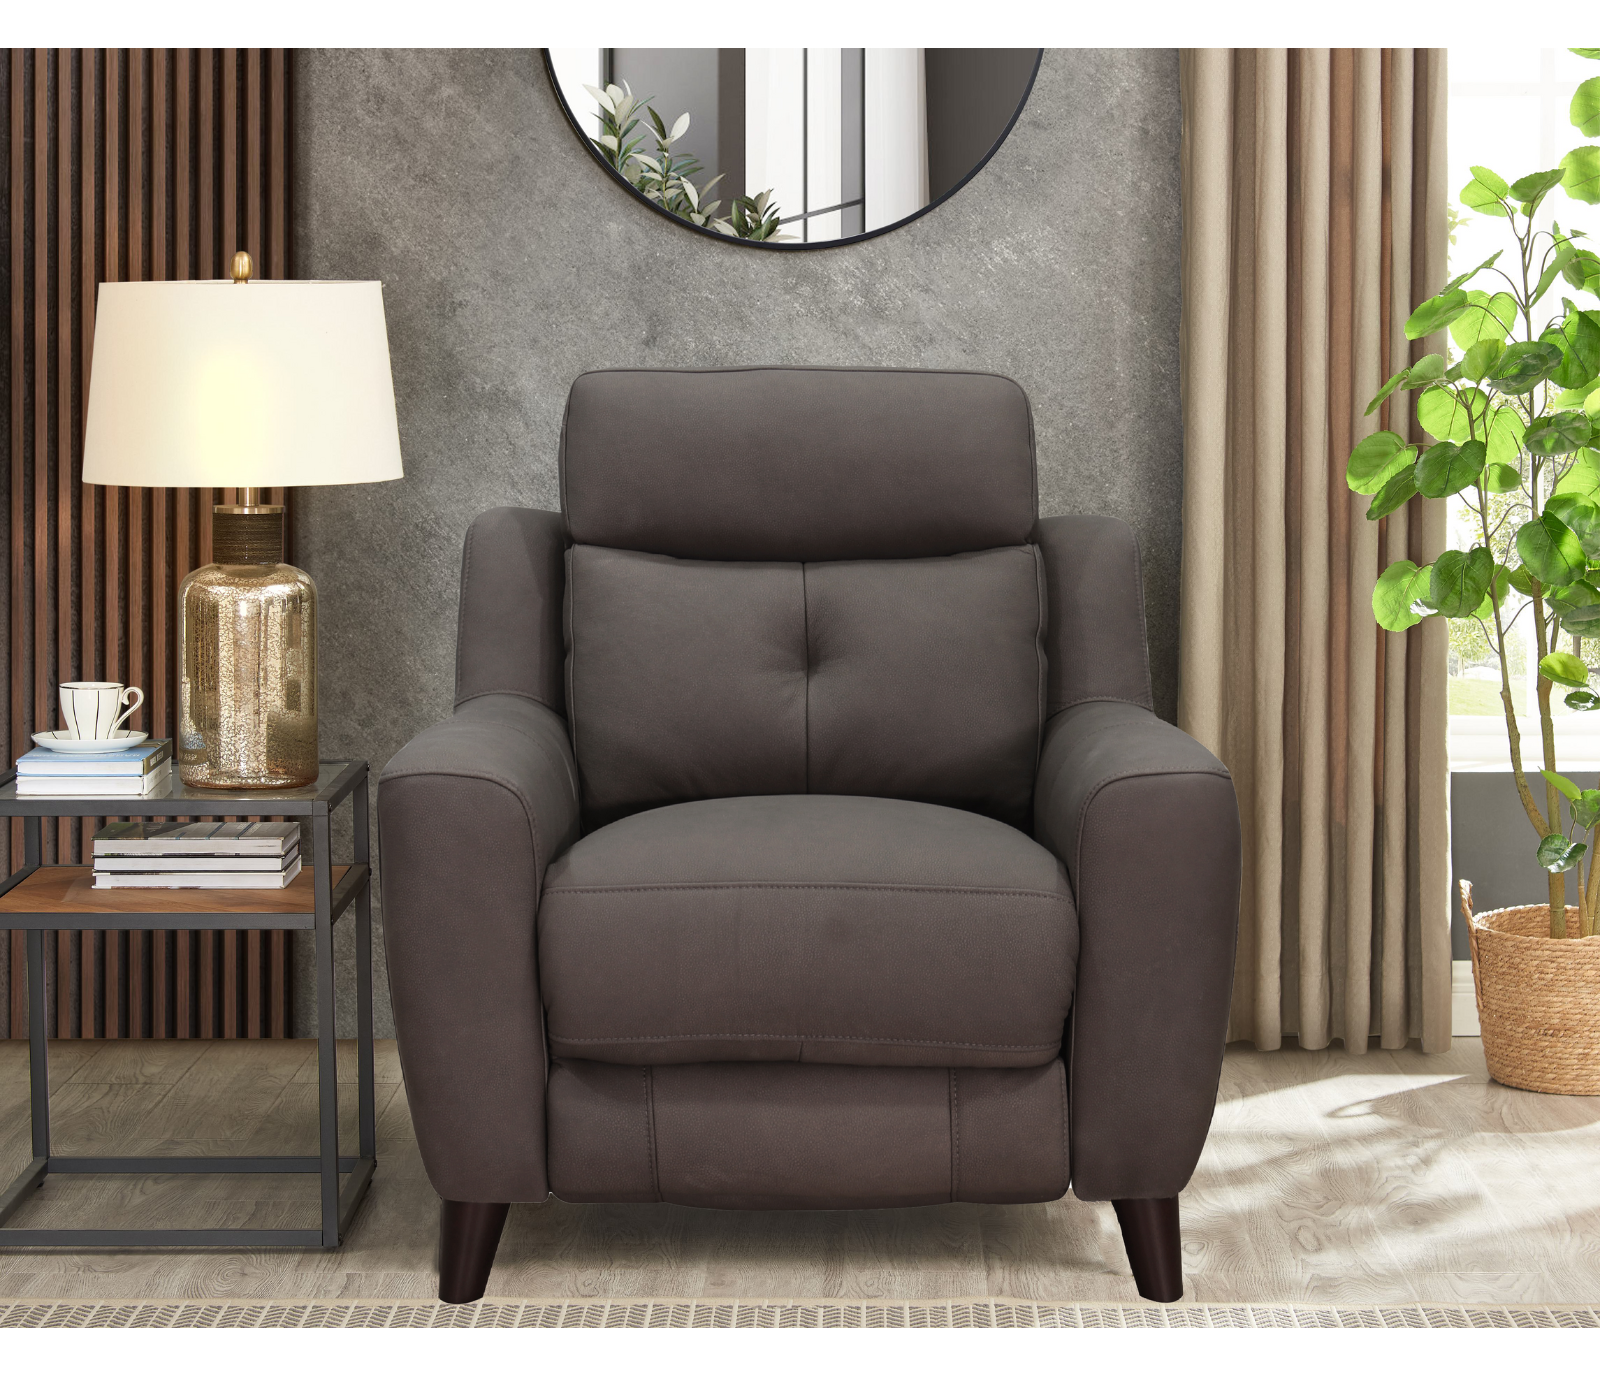 Ritchie Chair - Power Reclining w/ Power Headrest - Chocolate Leather